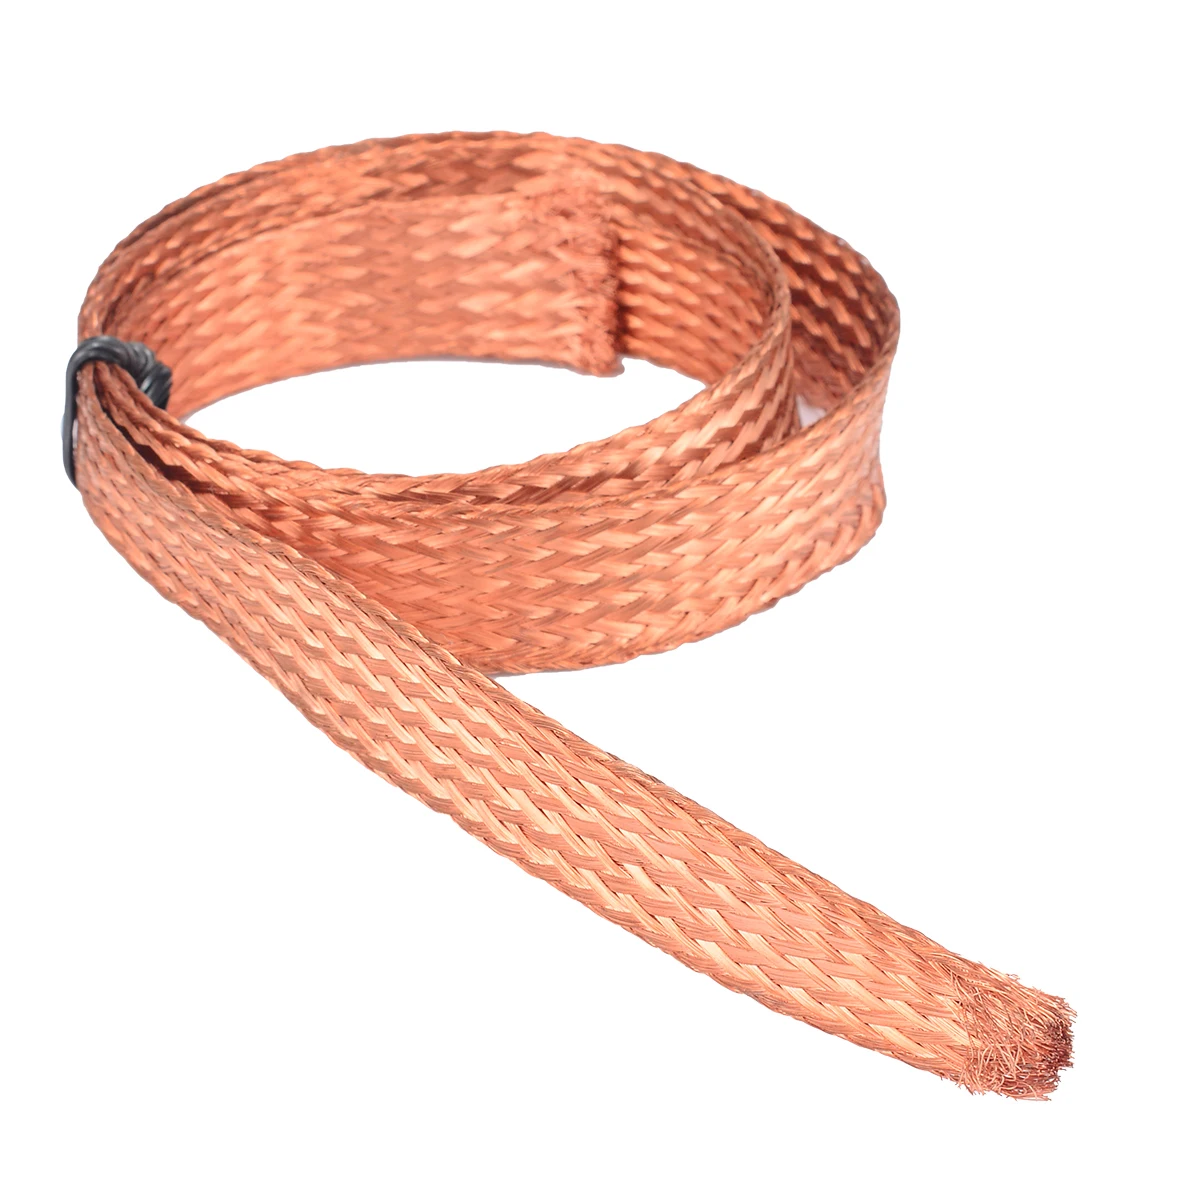 Flat Pure Copper Braid Cable Bare Ground Lead Copper Braid Wires 1m 3.3ft x 15mm 